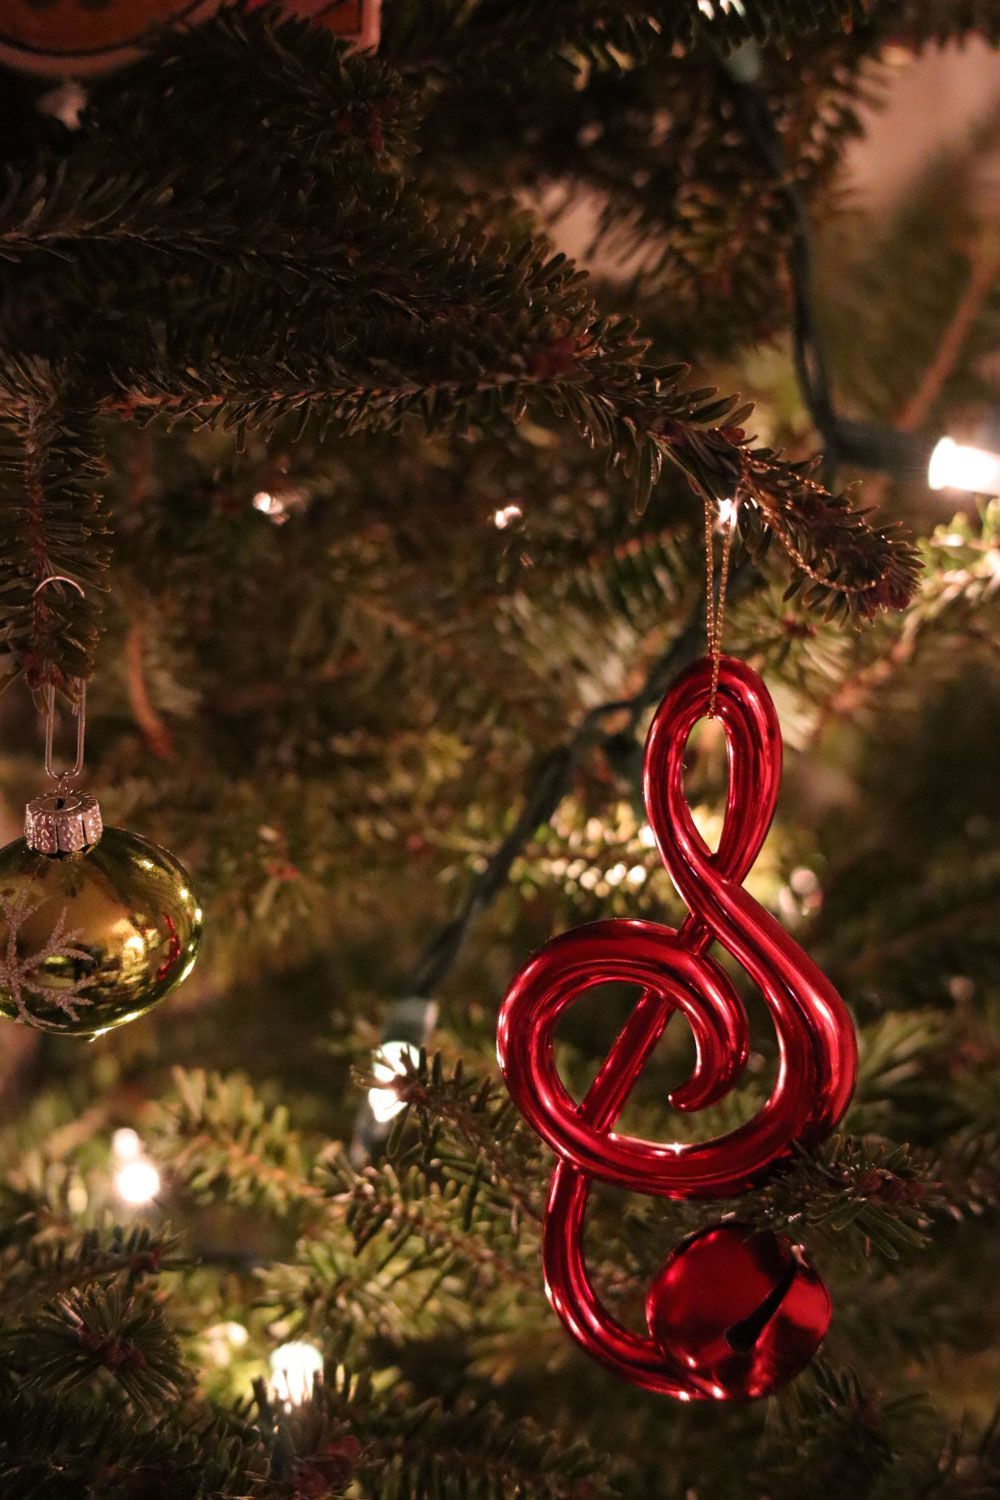 Christmas tree with music ornament